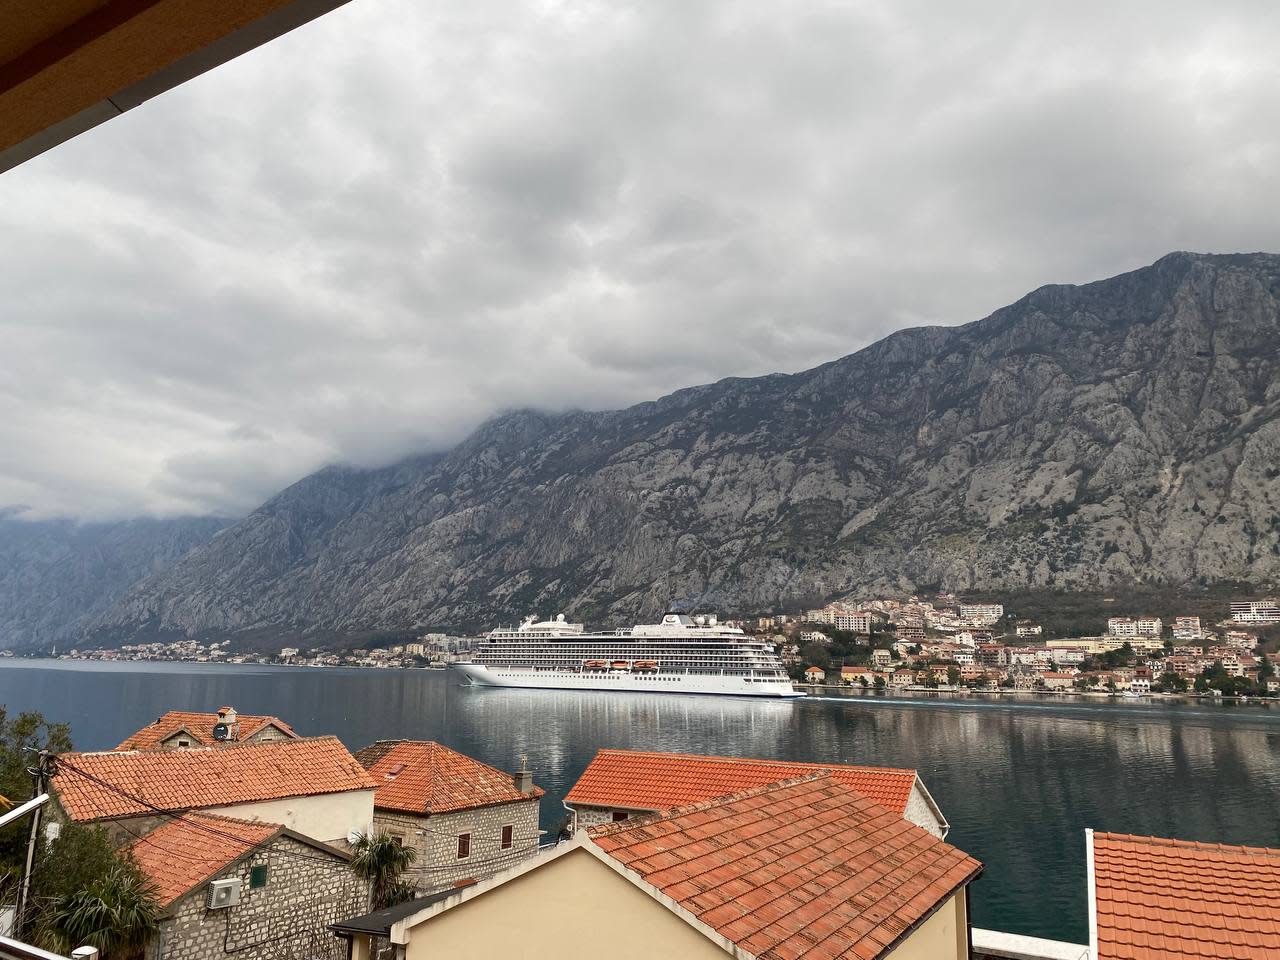 <title>The view from hotel in Kotor, Montenegro | Eugene R.</title>